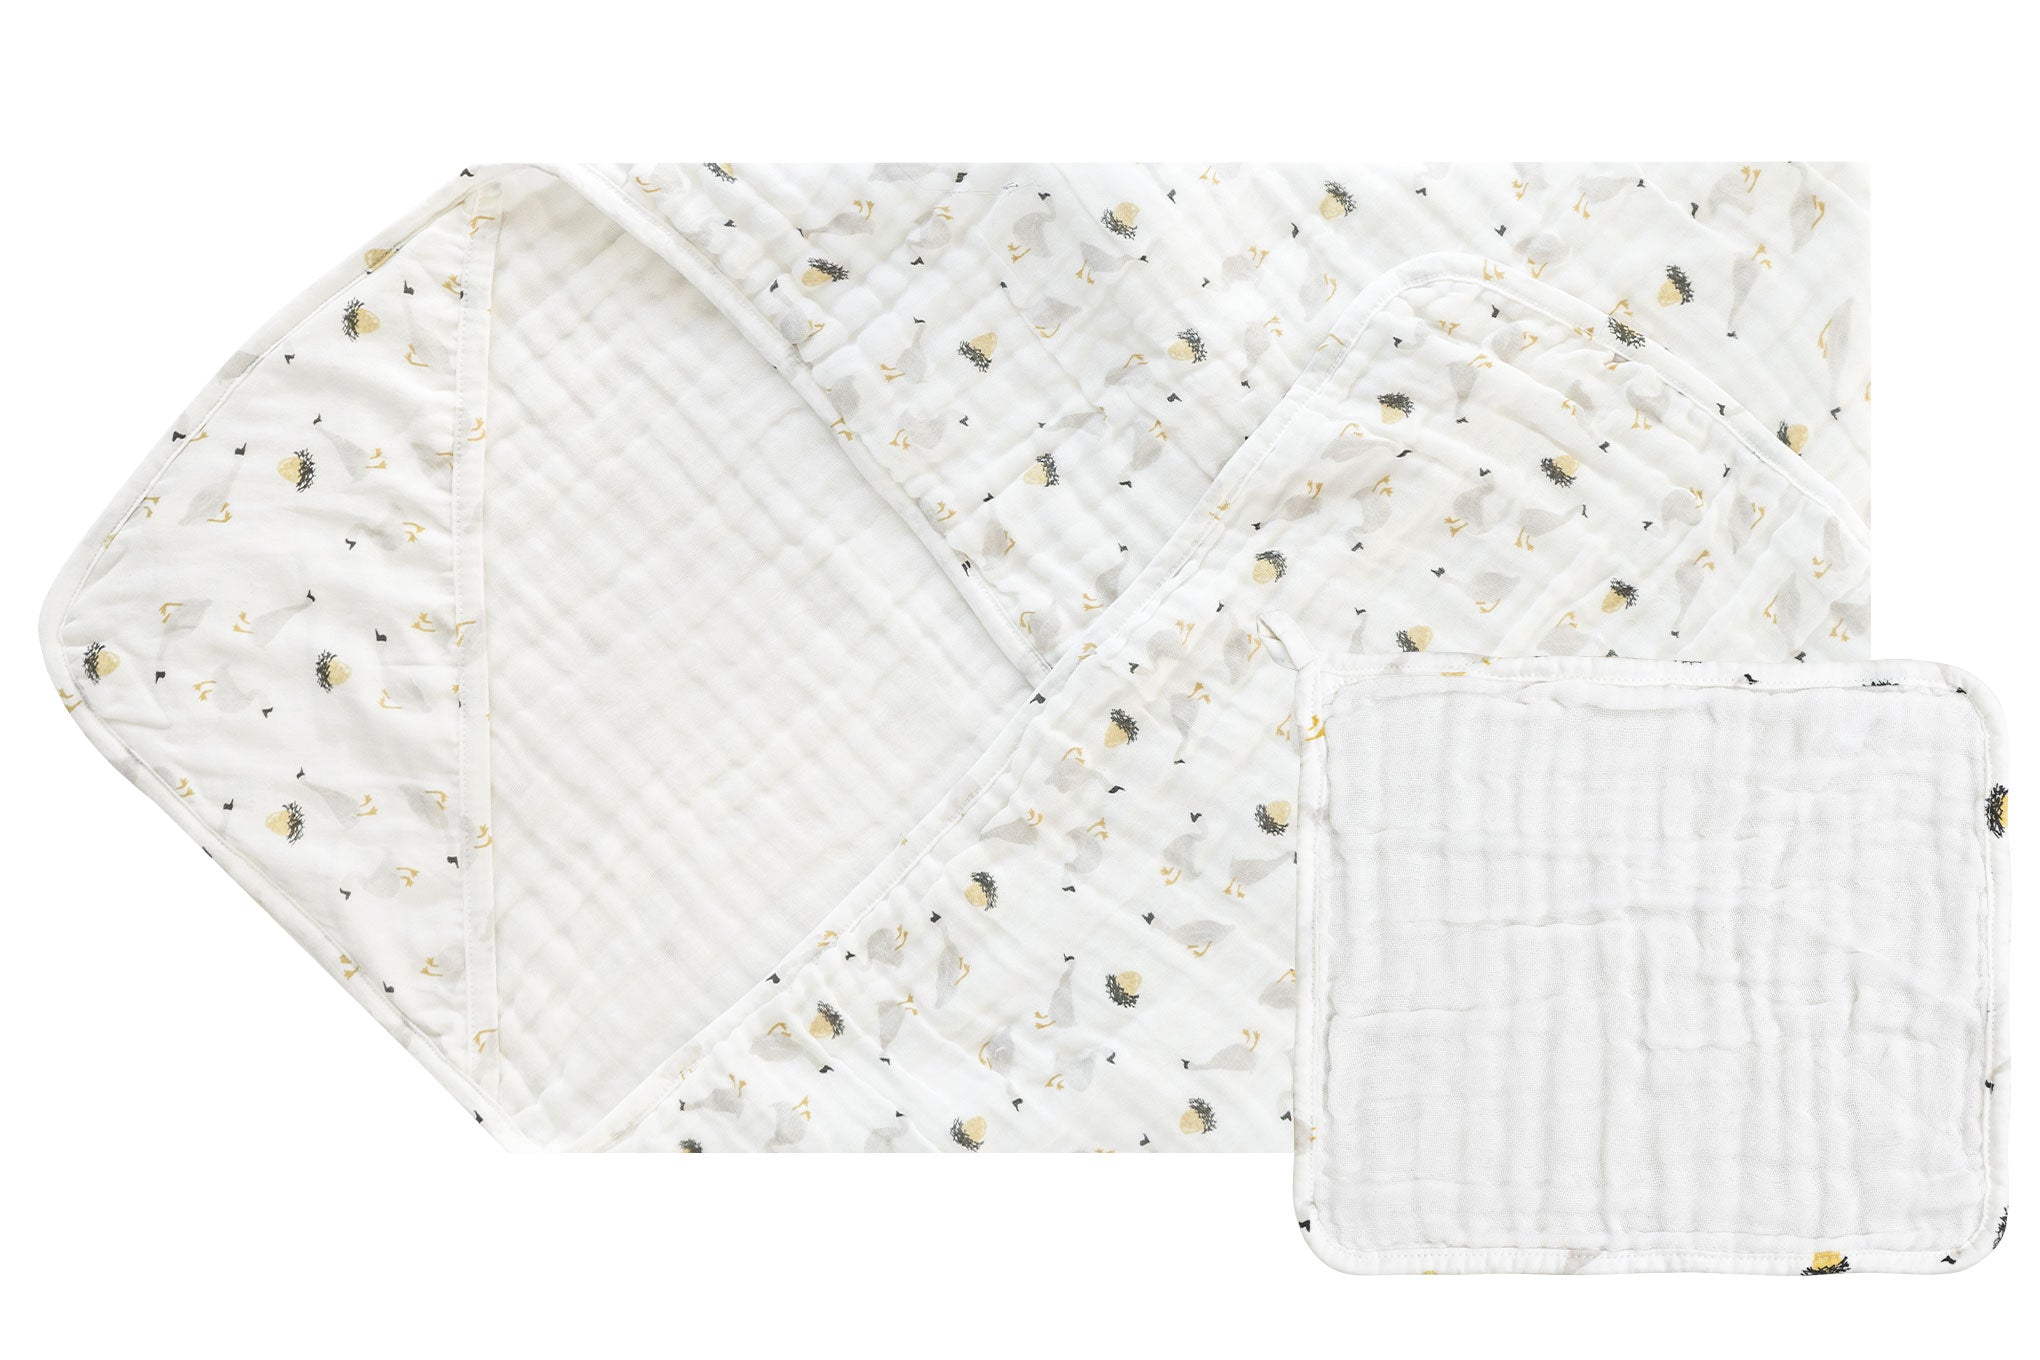 9-Layer Hooded Baby Bath Towel (Organic Cotton) - The Goose & The Golden Egg